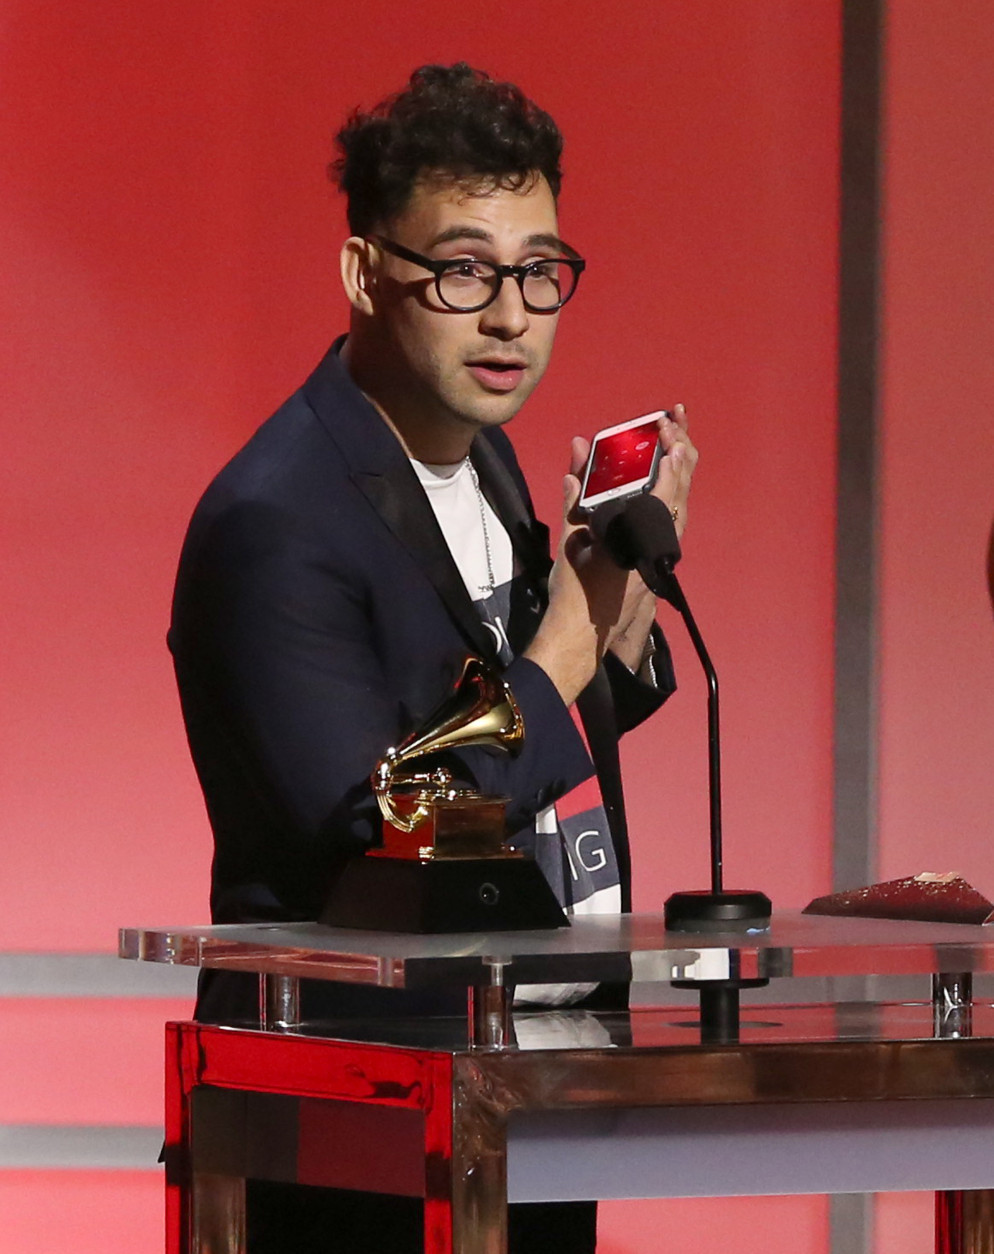 Jack Antonoff calls Taylor Swift as he accepts their award for pop vocal album at the 58th annual Grammy Awards on Monday, Feb. 15, 2016, in Los Angeles. (Photo by Matt Sayles/Invision/AP)